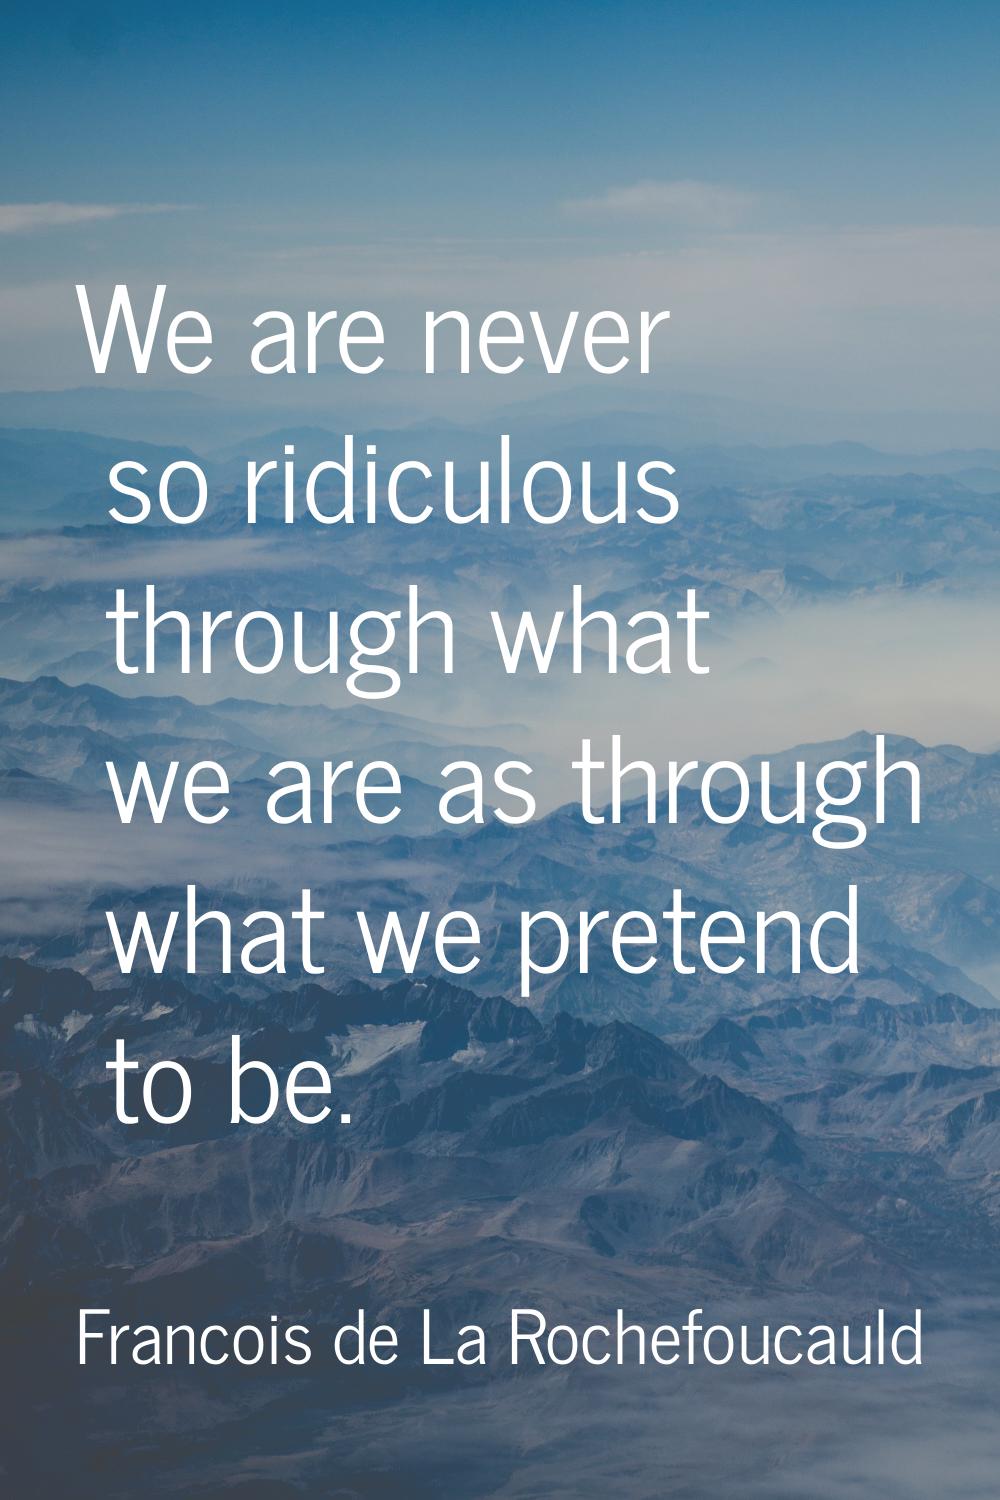 We are never so ridiculous through what we are as through what we pretend to be.